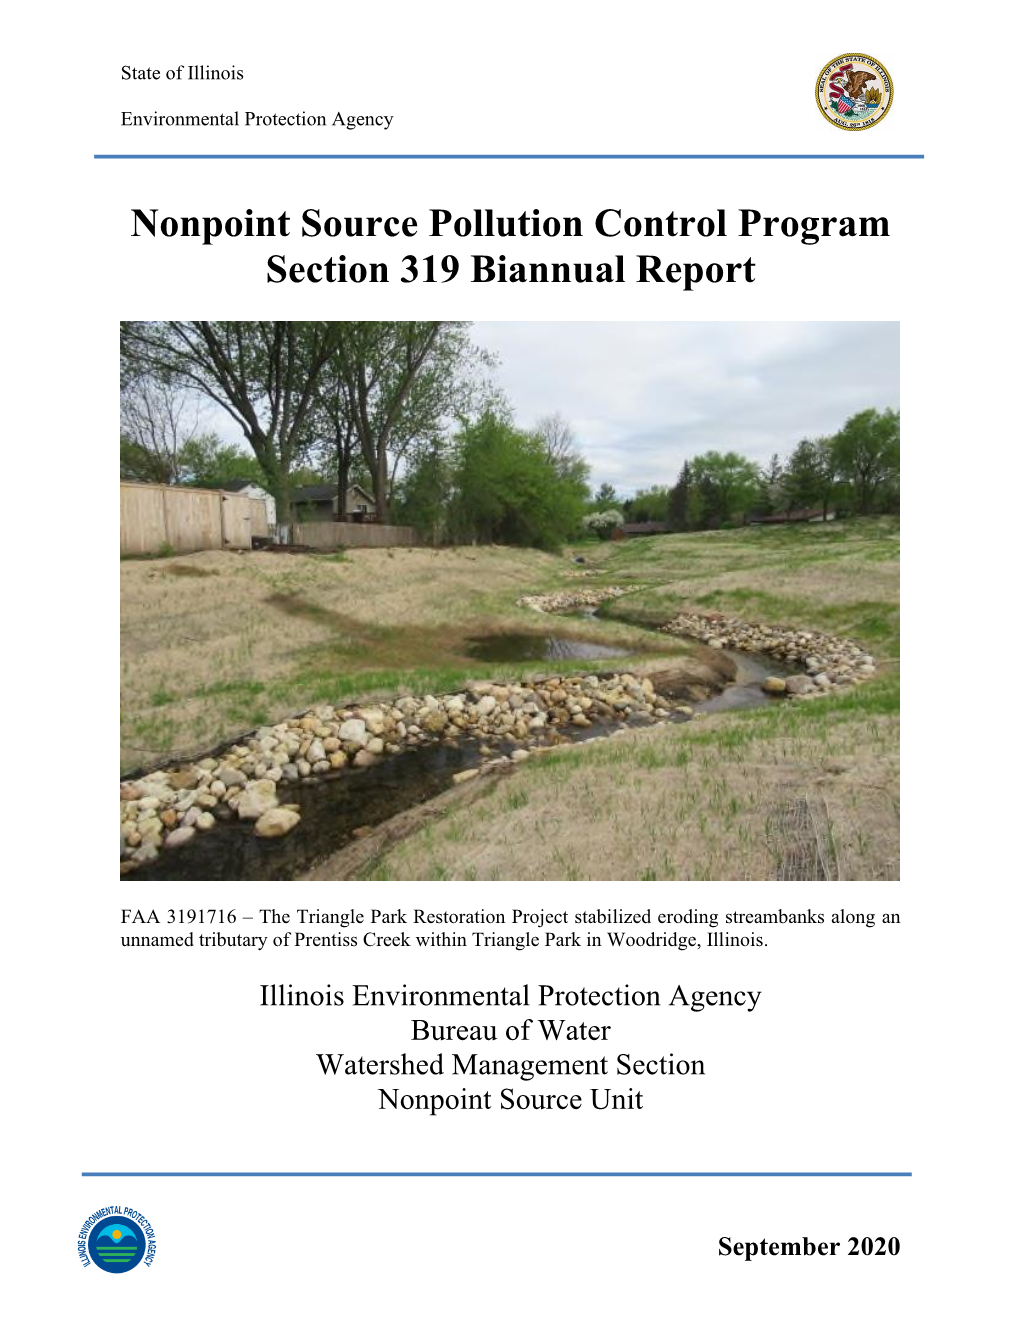 Nonpoint Source Pollution Control Program Section 319 Biannual Report